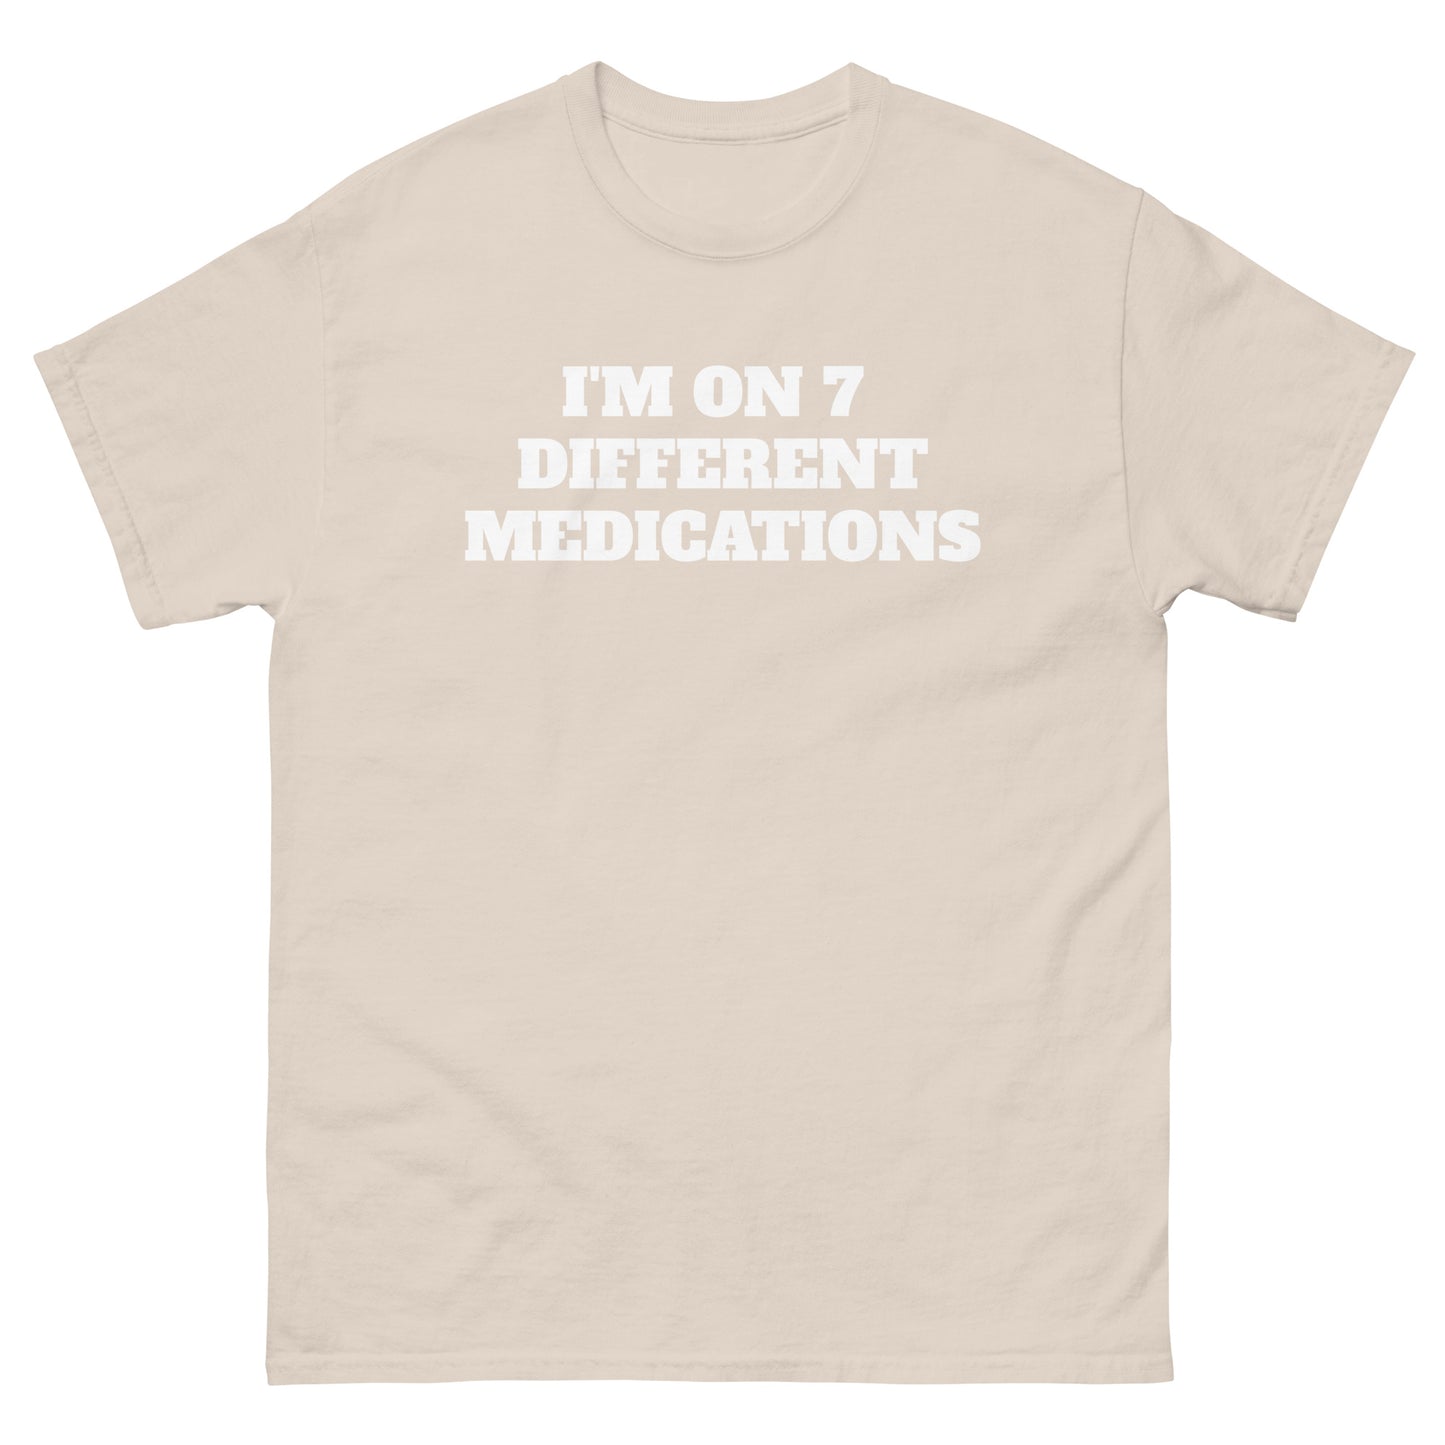 7 Different Medications Matching Tee